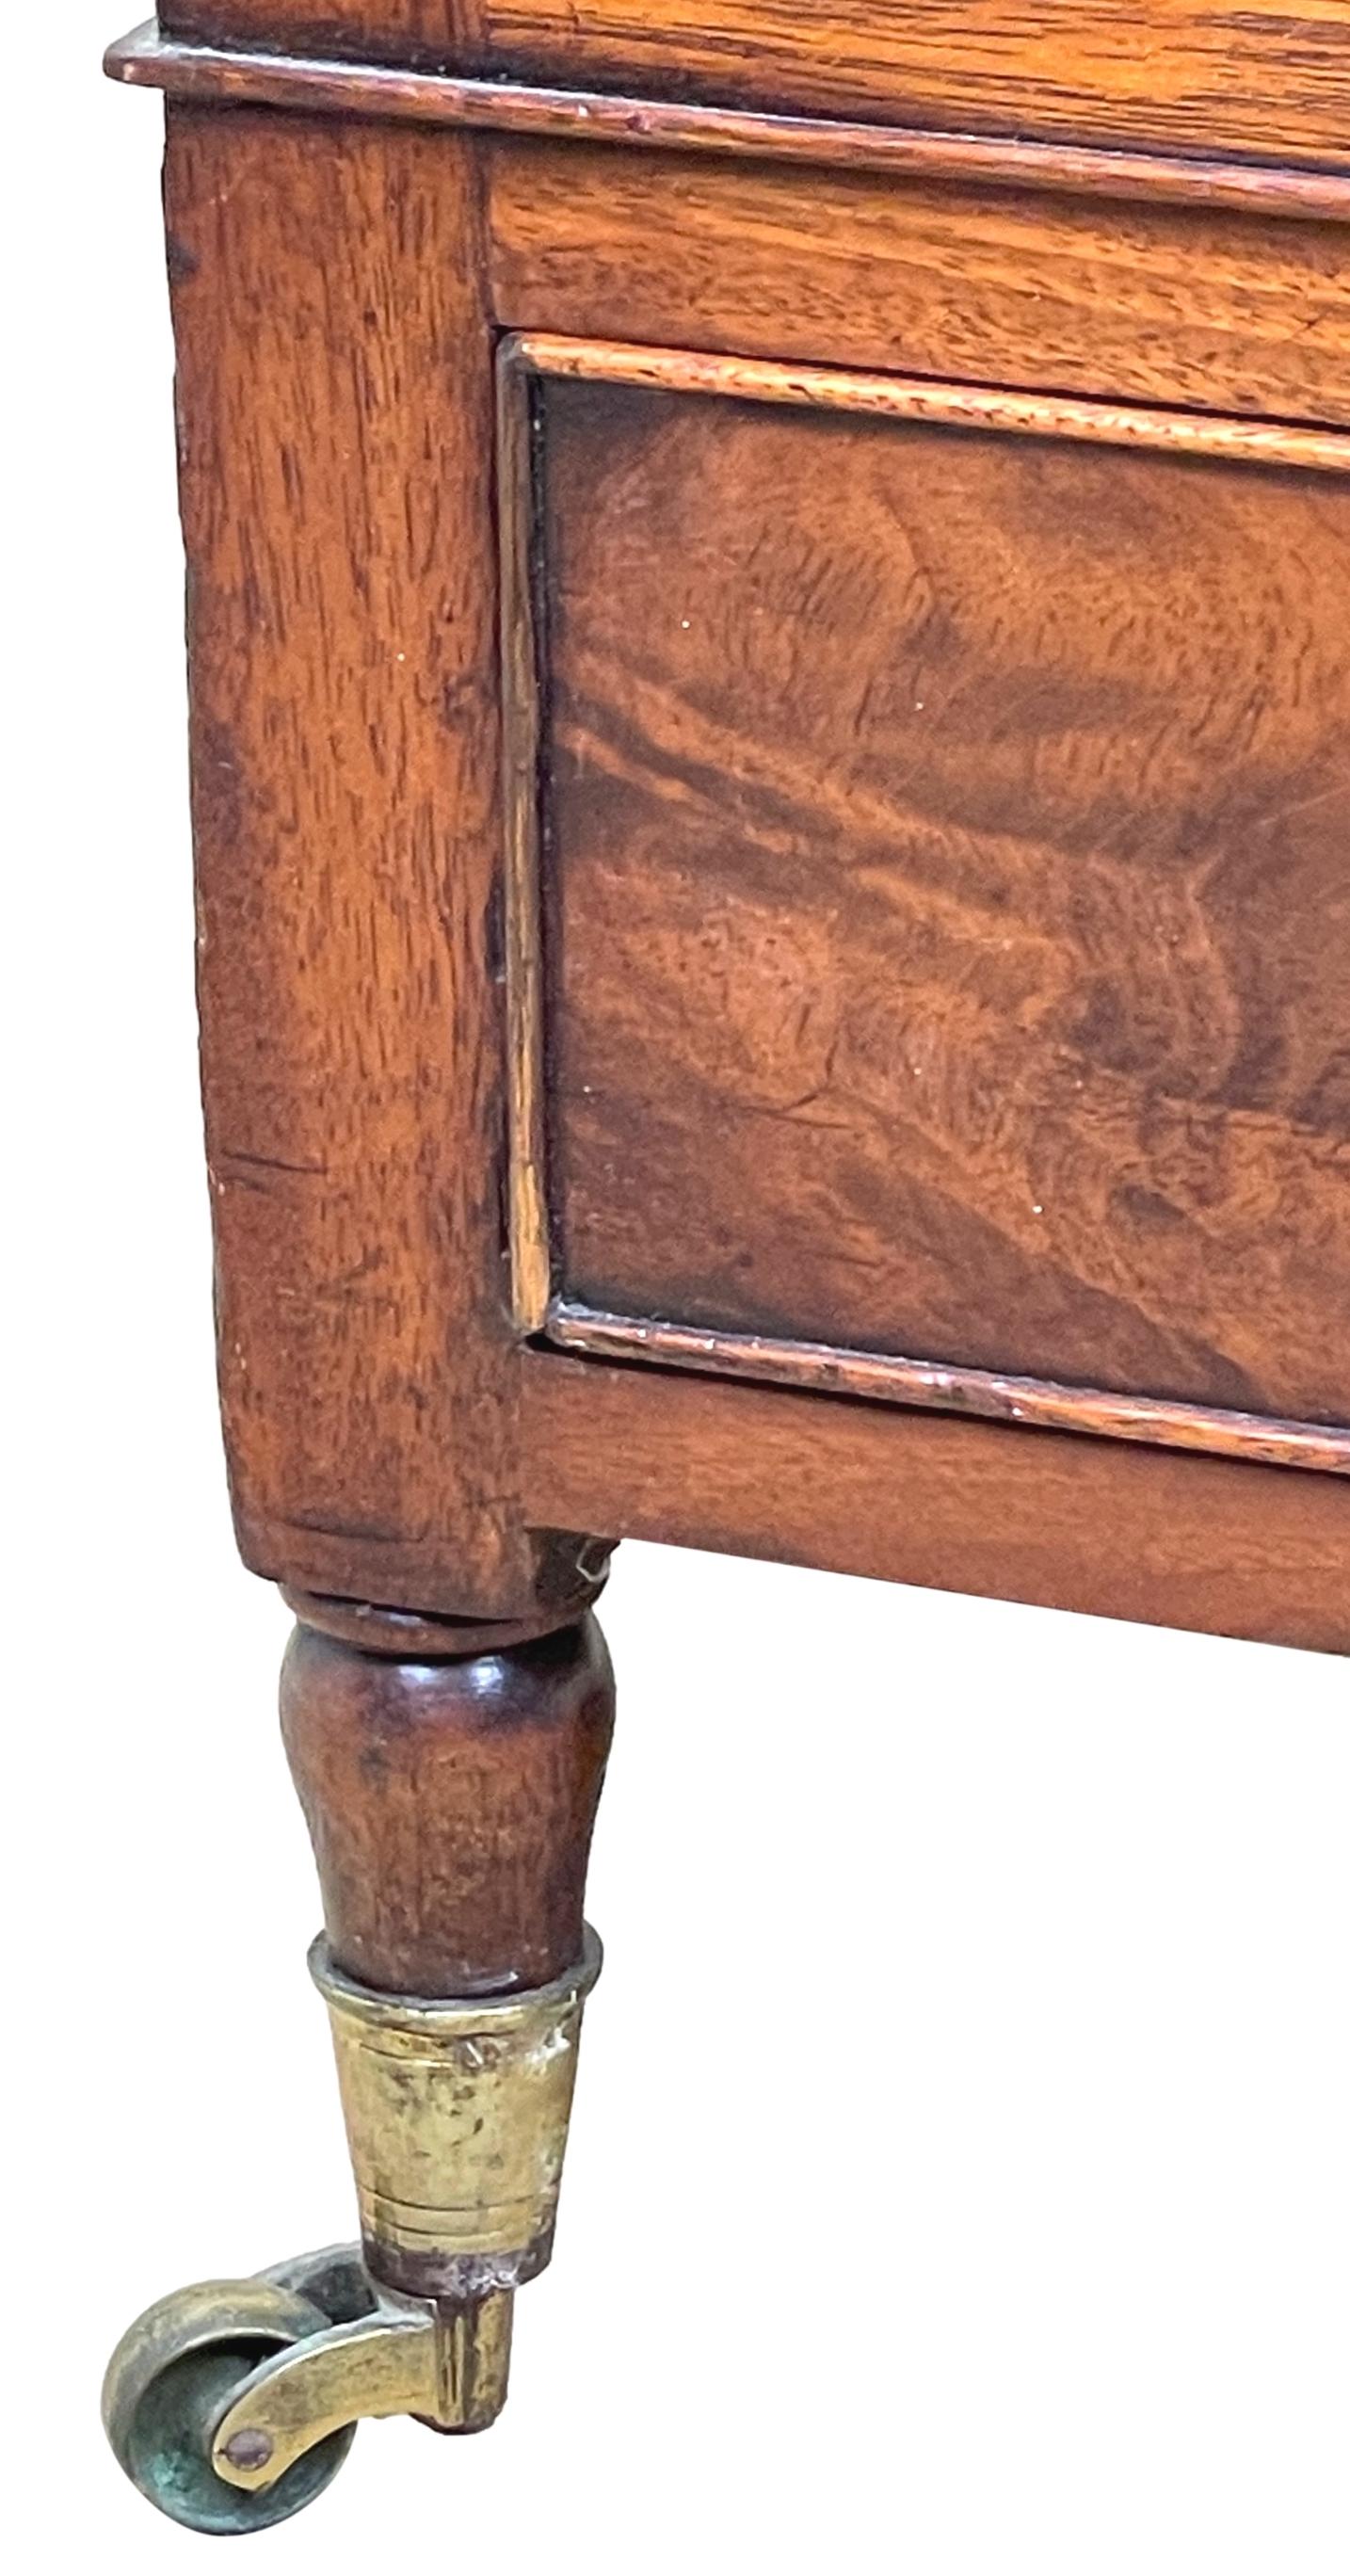 A Good Quality Regency Mahogany Boat Shaped Canterbury Having Elegant Turned Upright Supports And One Well Figured Frieze Drawer Raised On Elegant Turned Legs.

The term Canterbury is believed to have originally been used to describe articles such